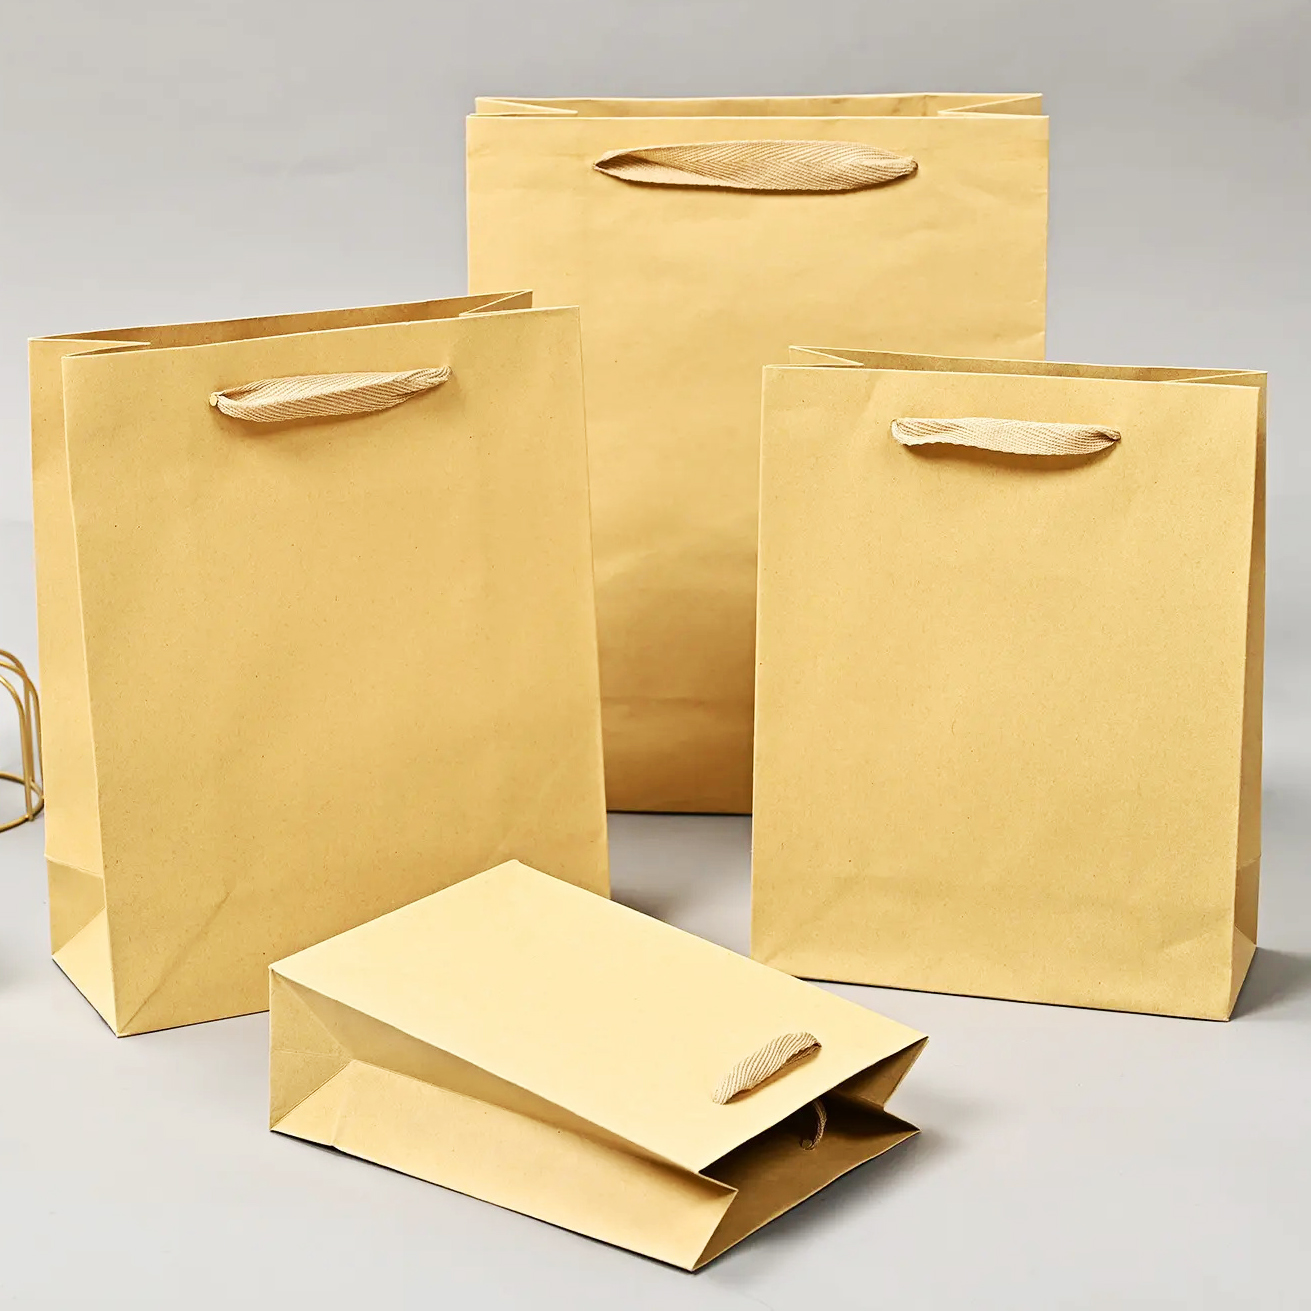 How do you print on a craft paper bag?